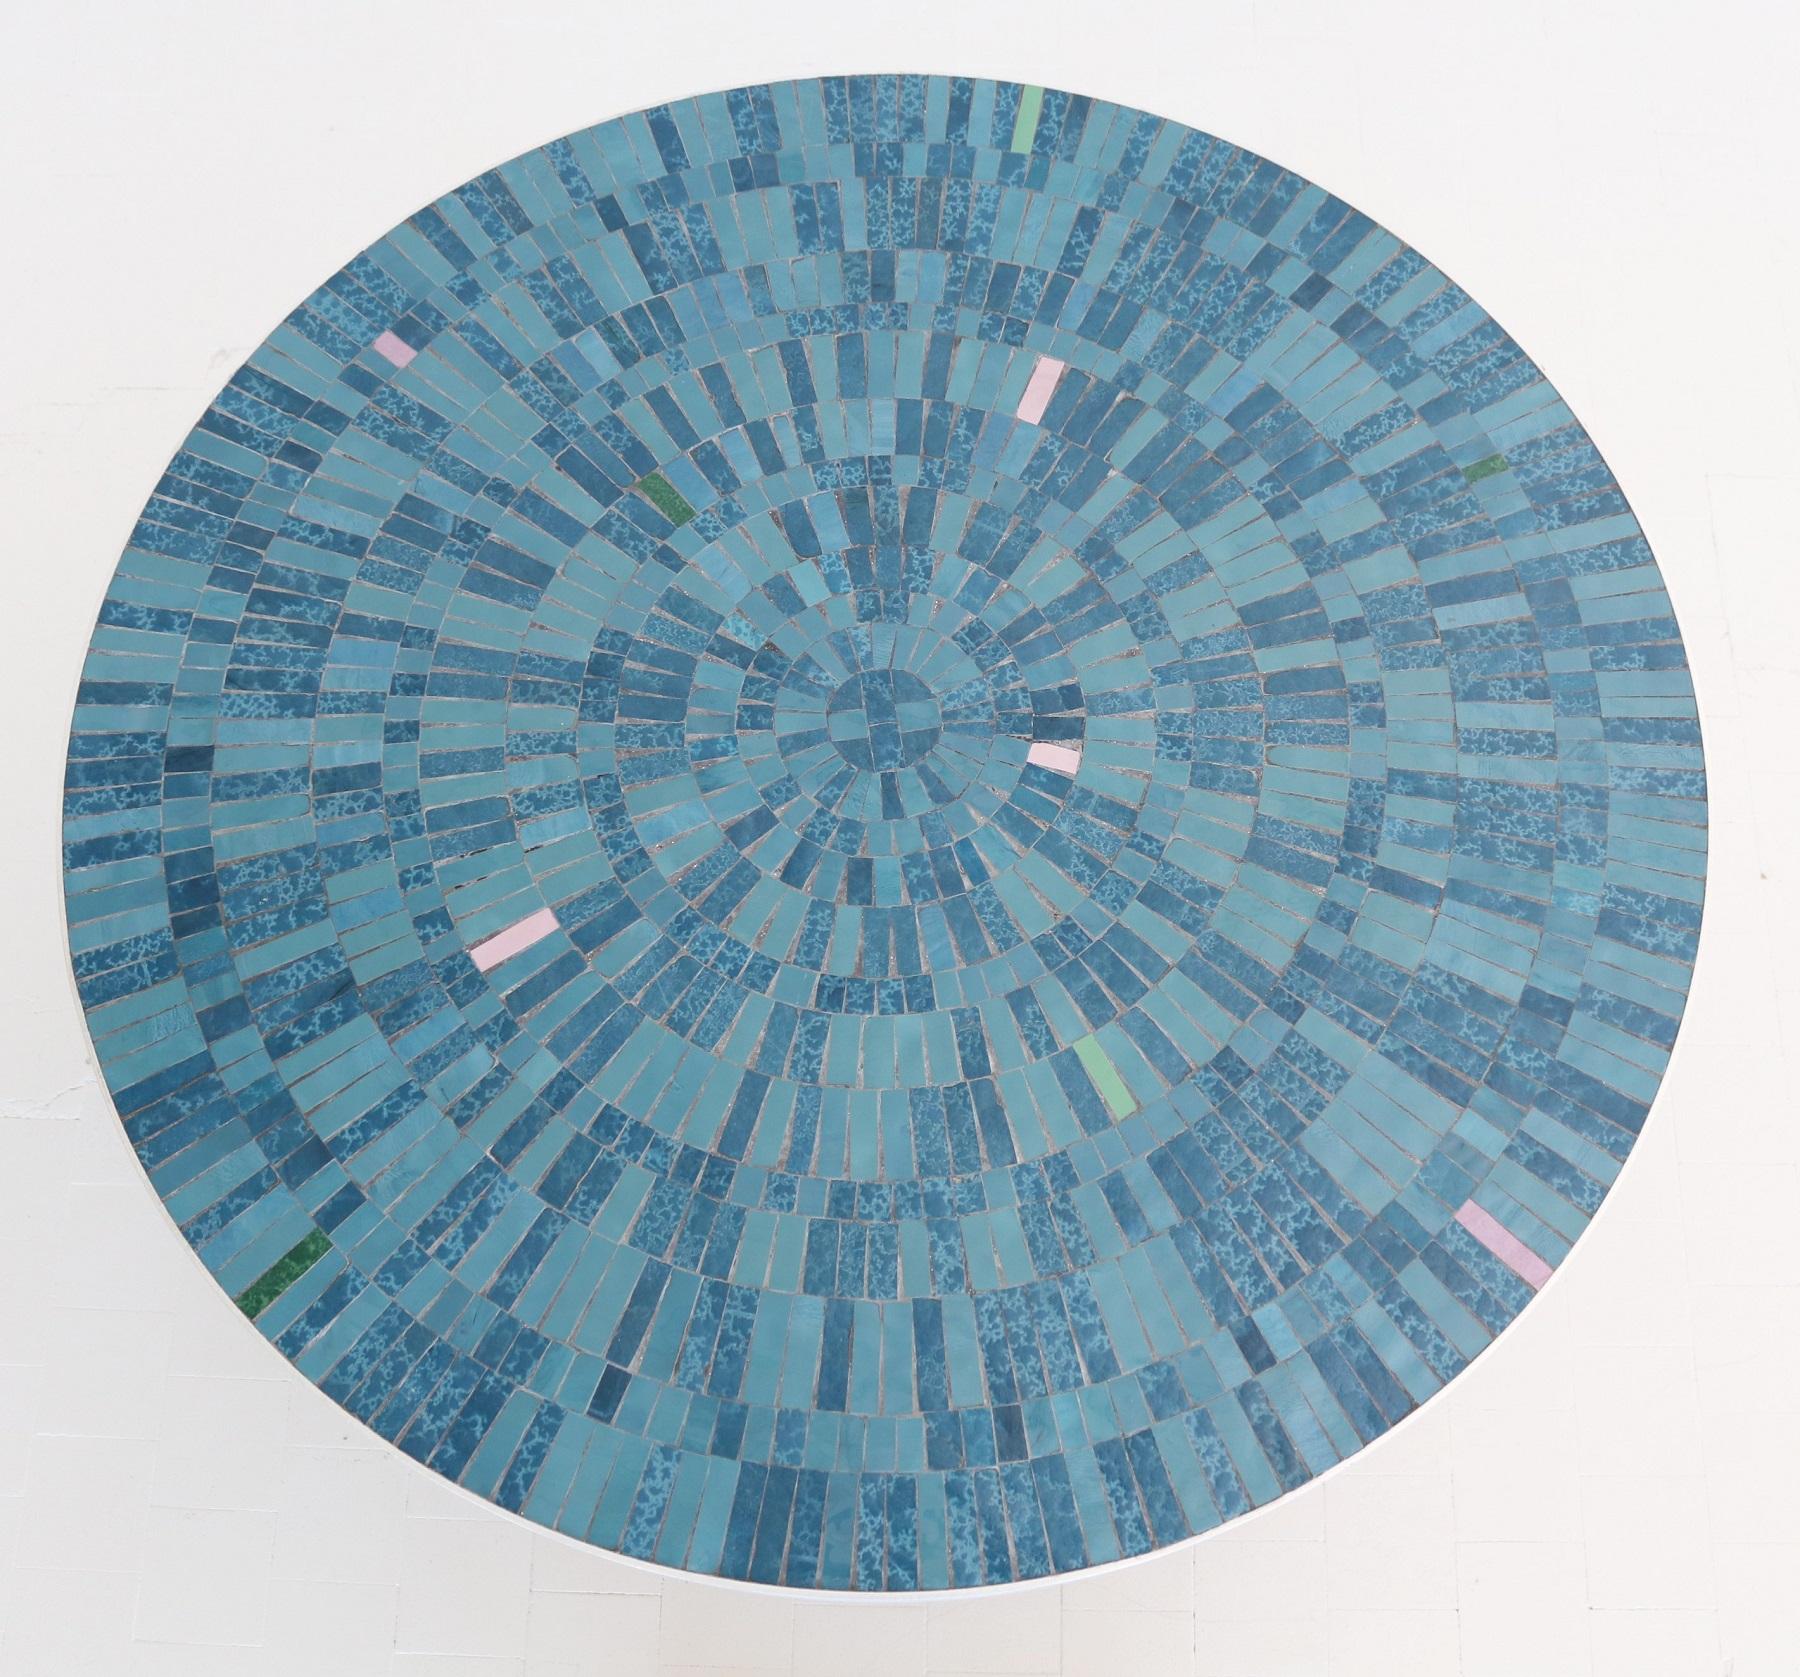 Gorgeous coffee table with beautiful Mosaic of tiles in various colors of blue, green and pink on strong table base.
Made in Germany in the 1960s by Berthold Müller Mosaikwerkstatt, Oerlighausen
The rim of the top is made of metal and the square